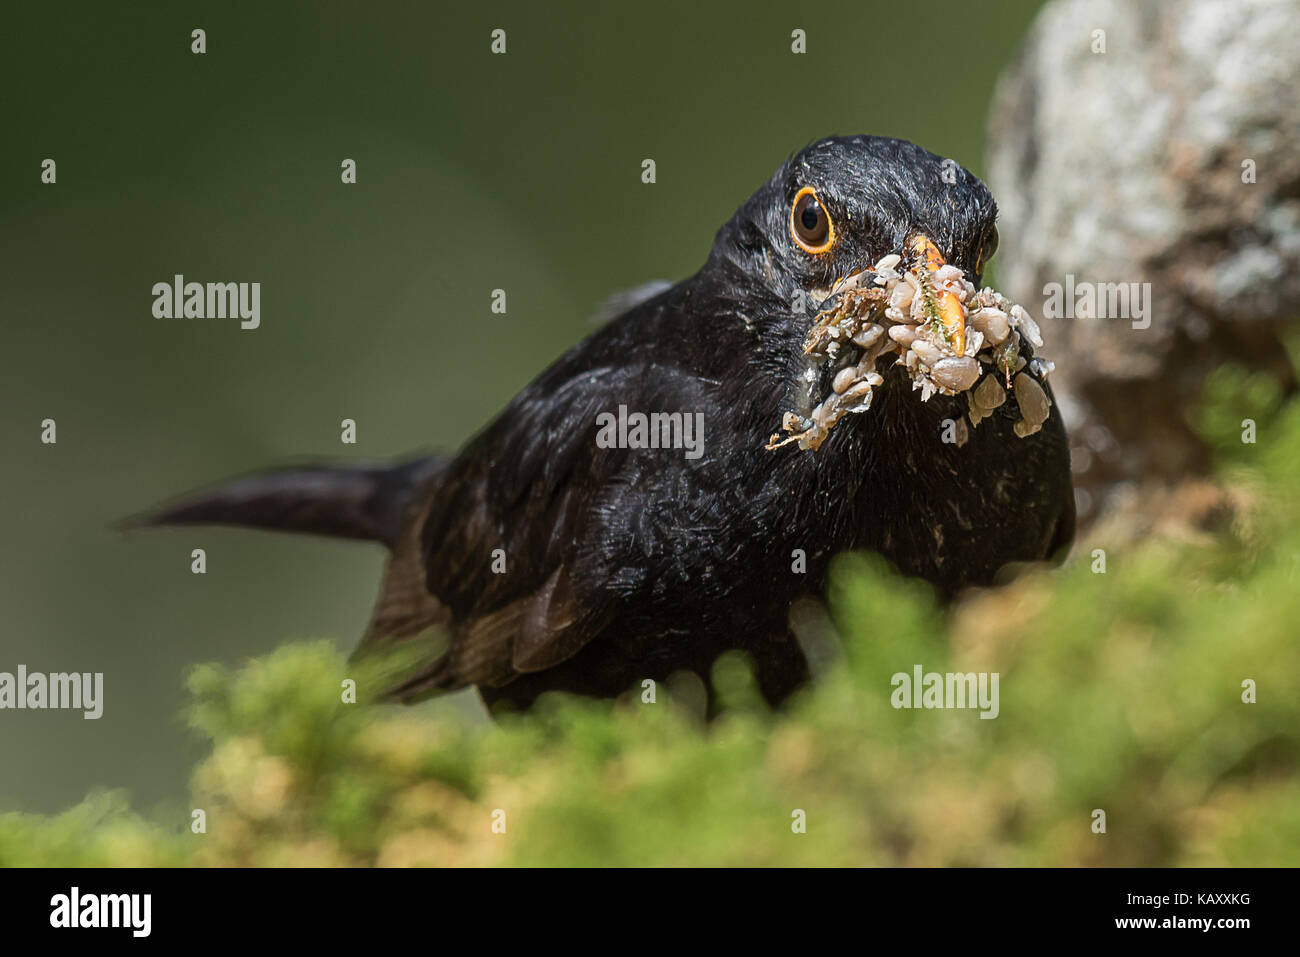 Very close up head photo of a male blackbird with its beak filled with food on seeds and other tasty bits. Stock Photo